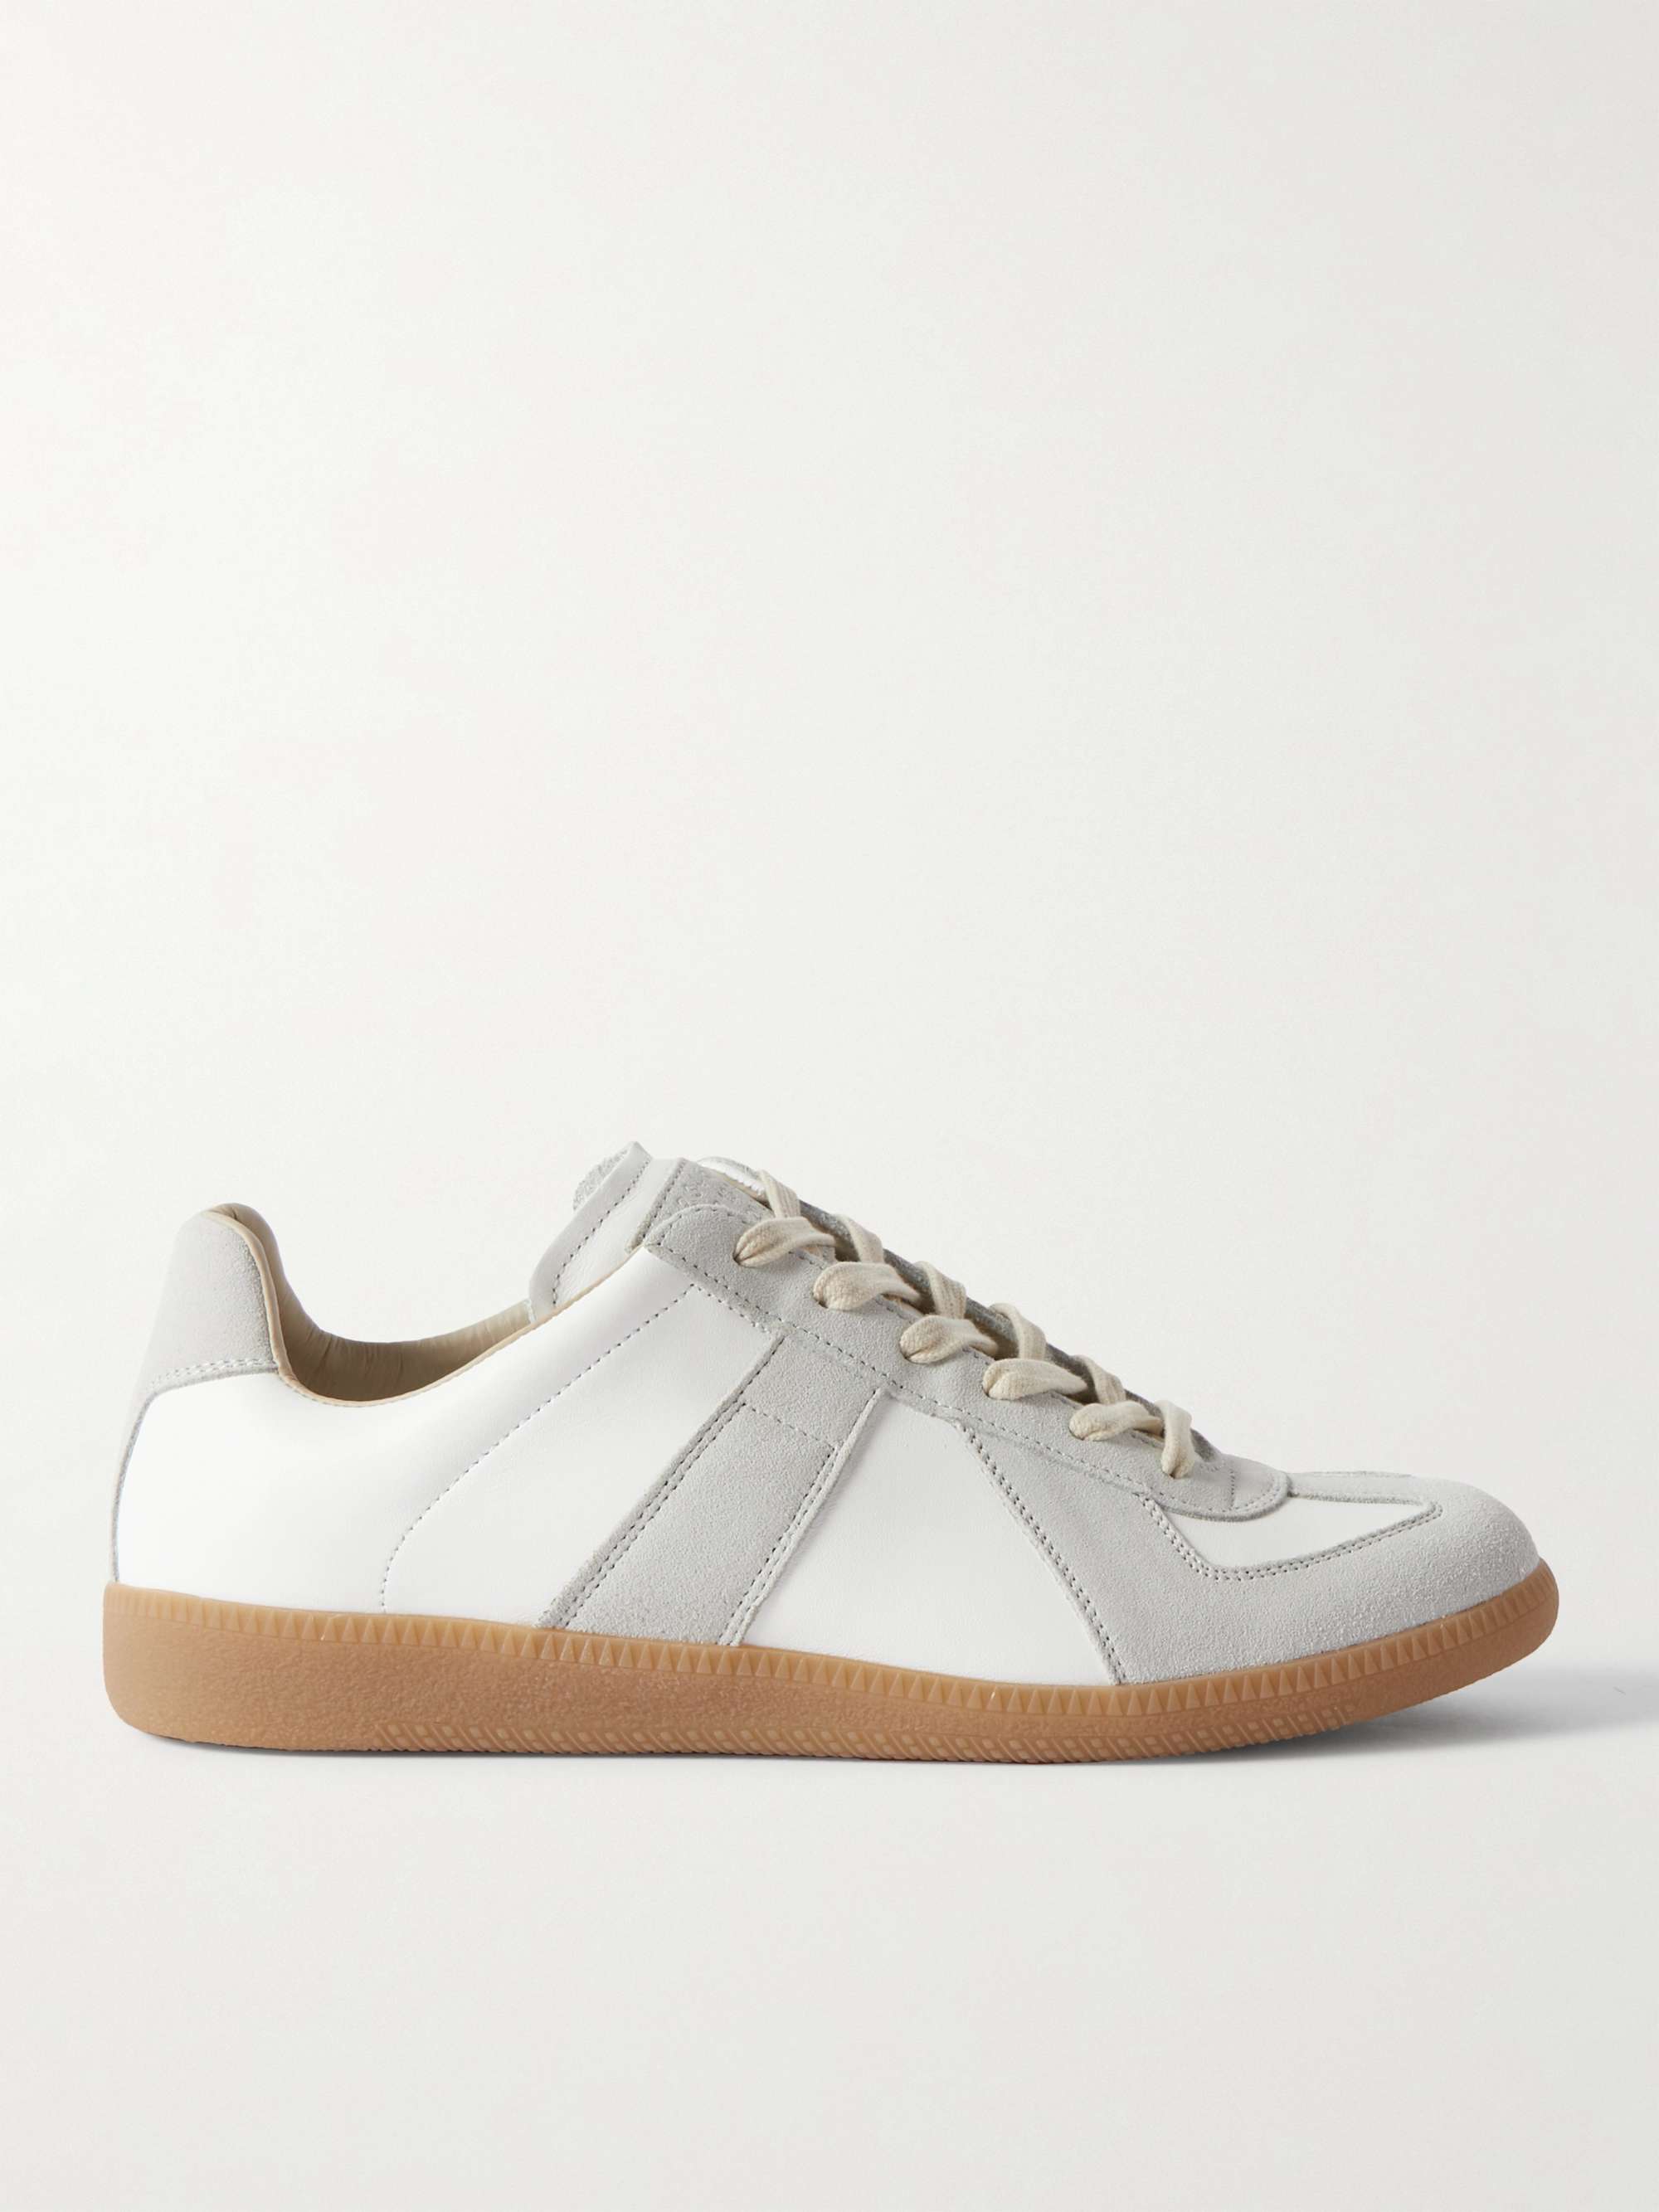 White Replica Leather and Suede Sneakers | MAISON MARGIELA | MR PORTER